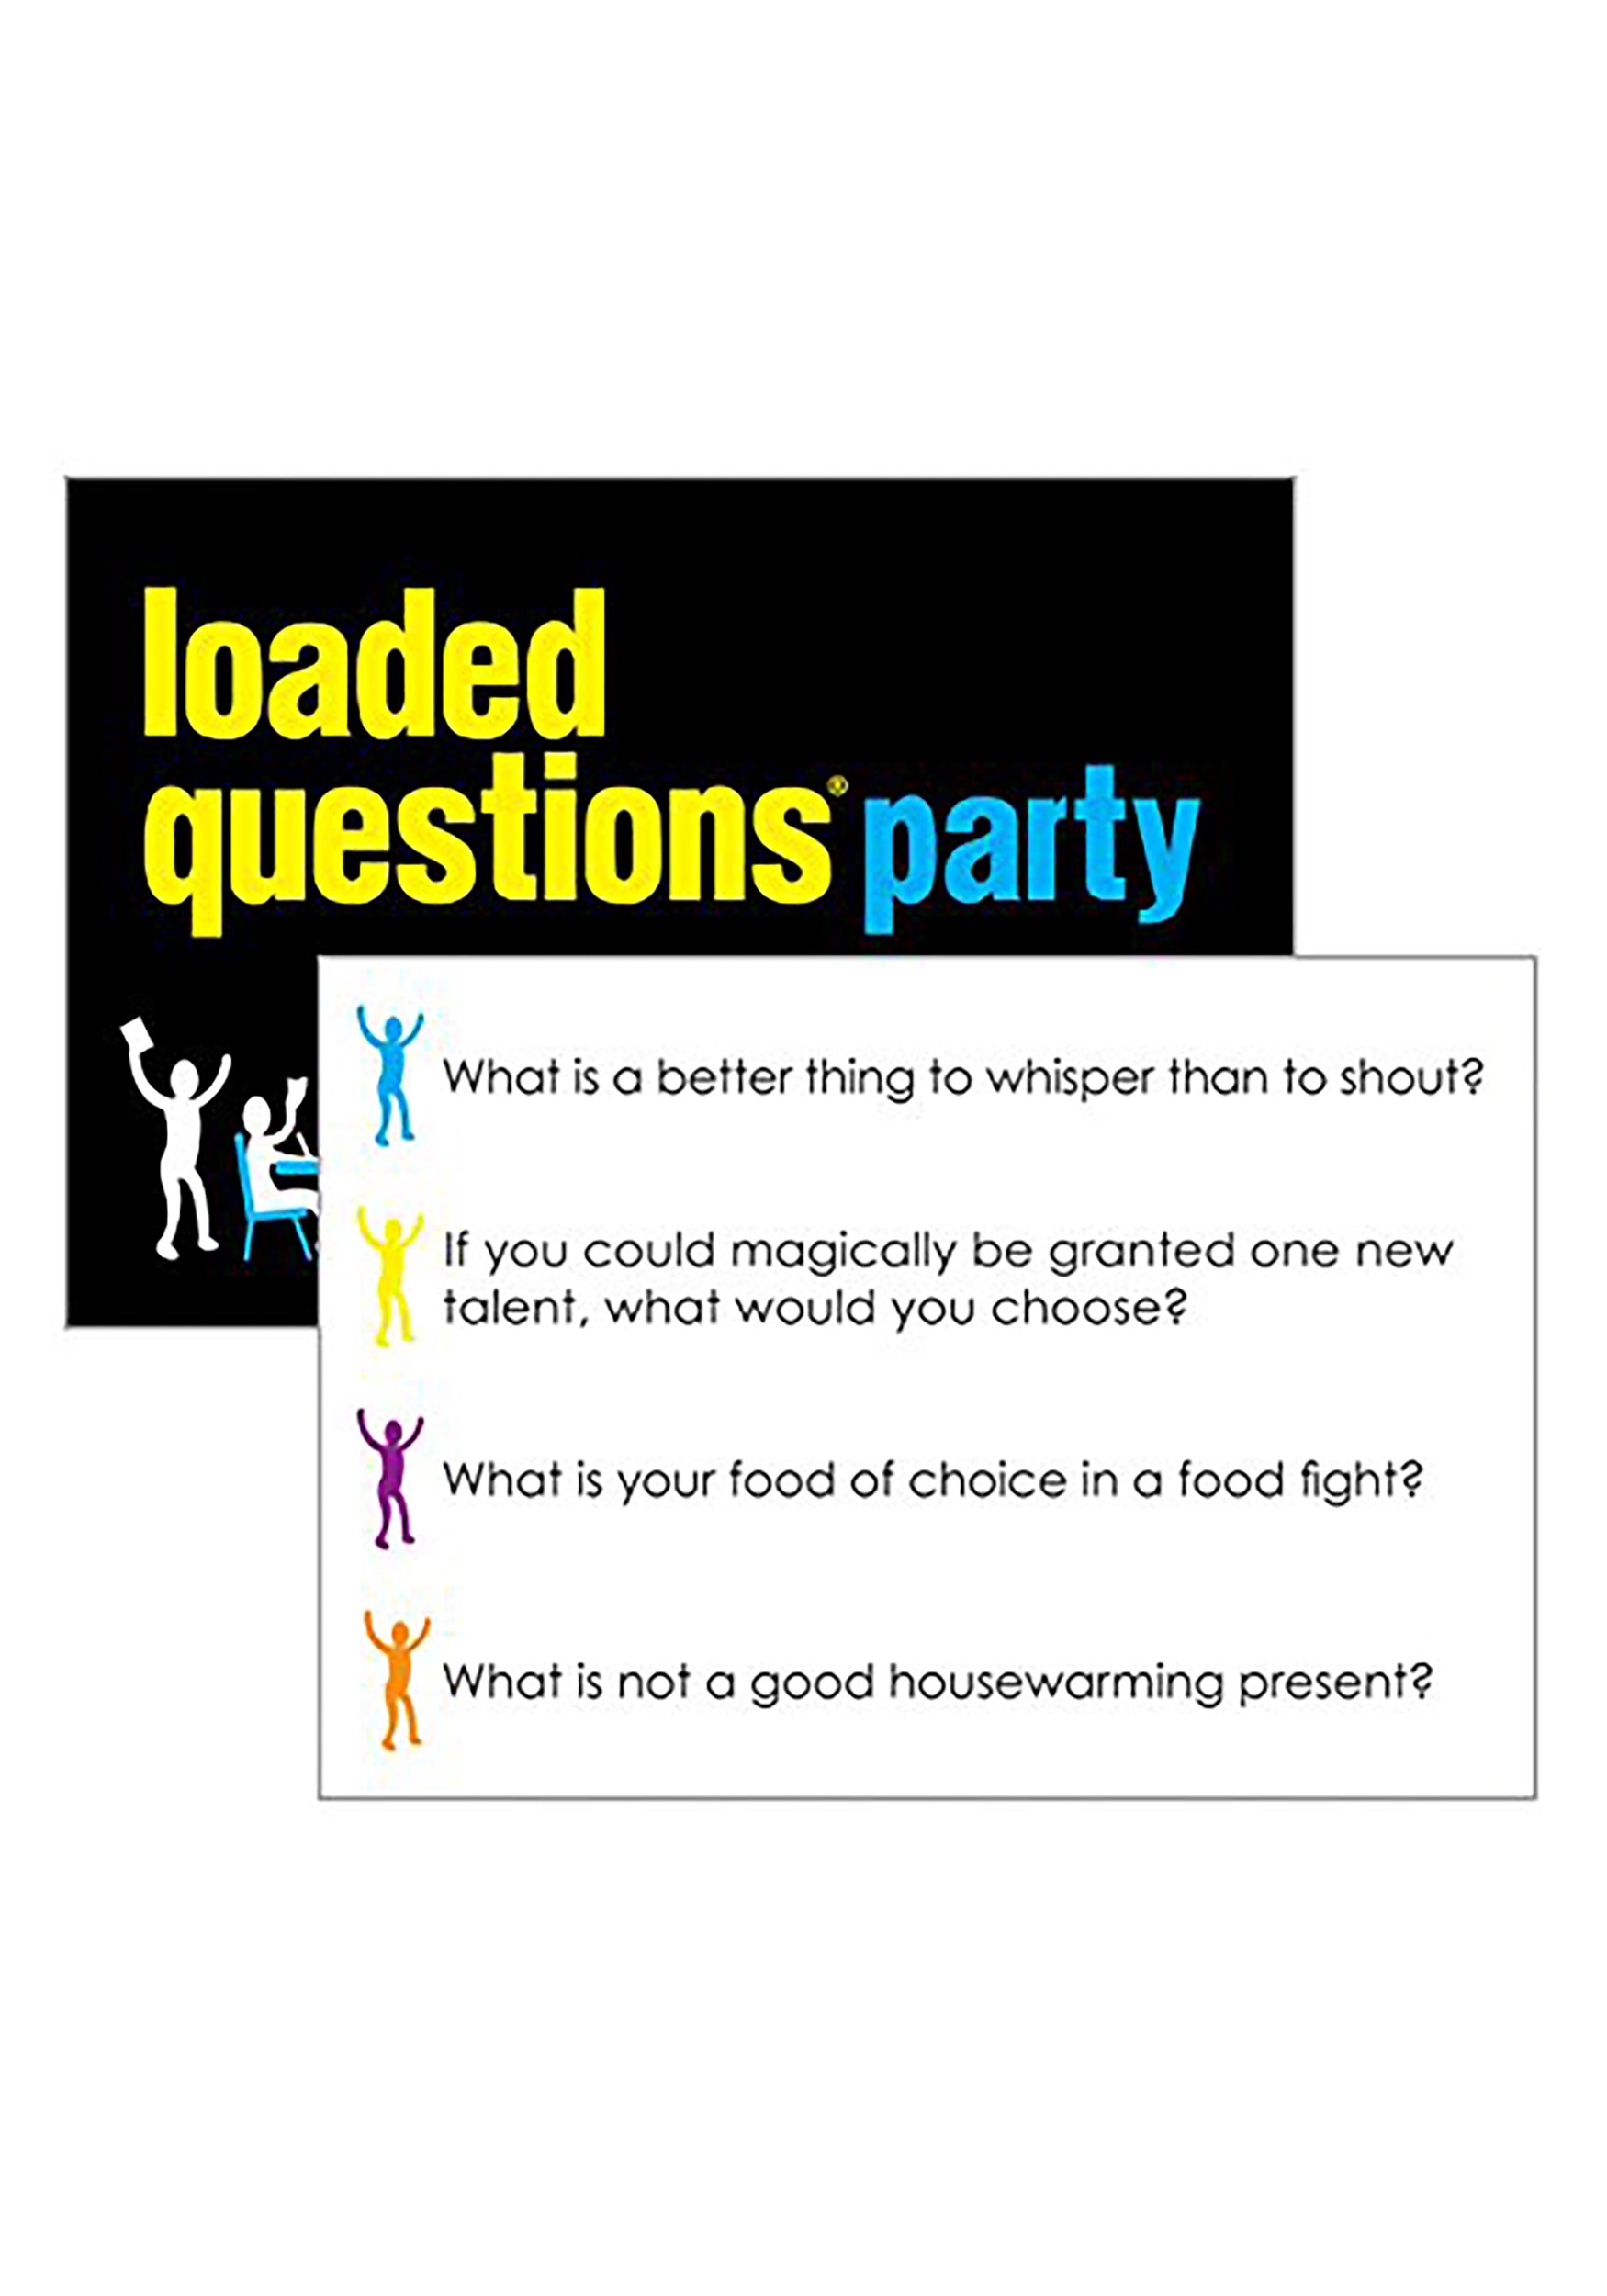 loaded questions game